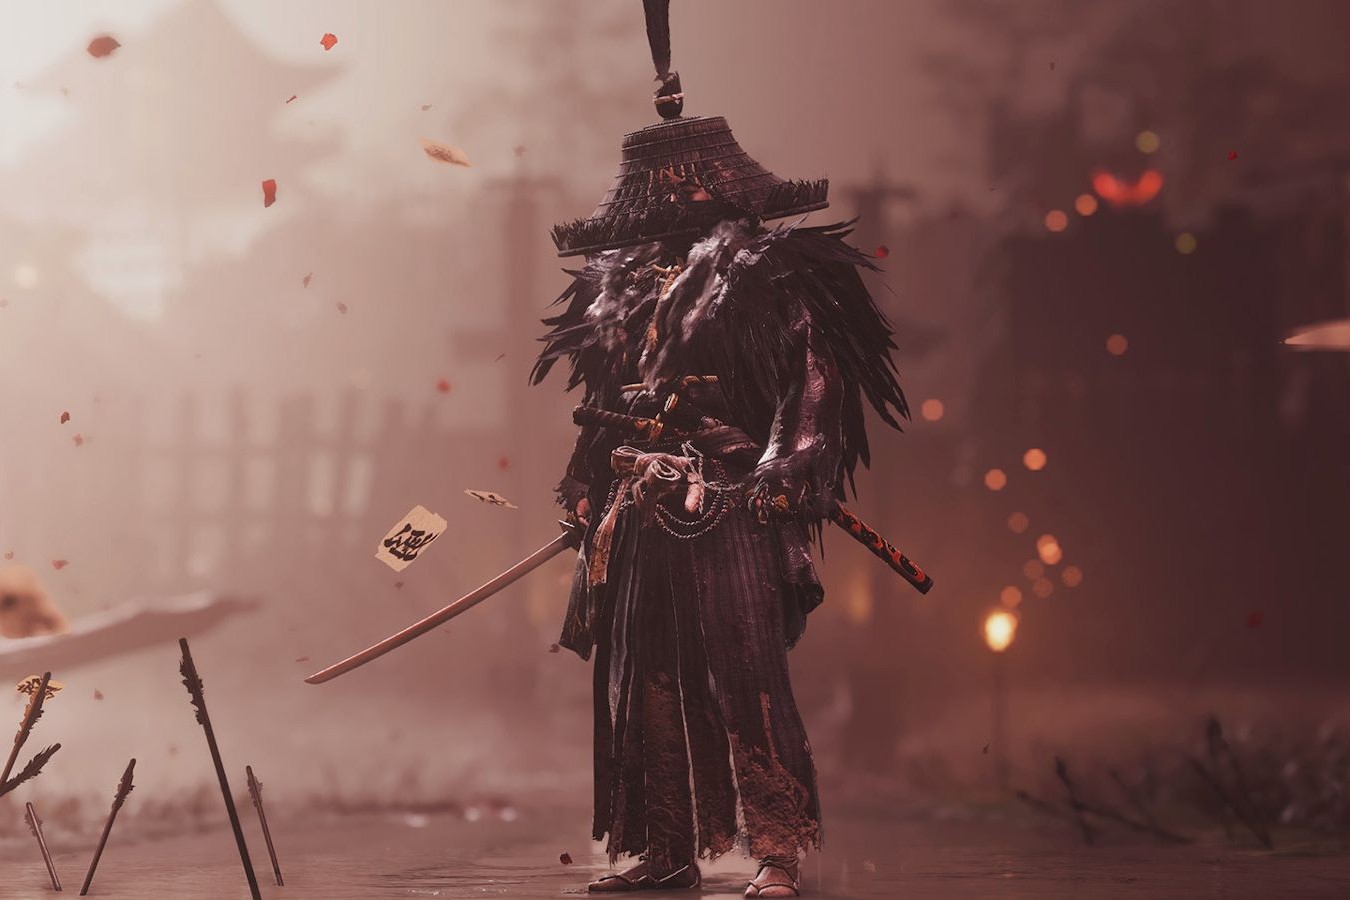 Bloodborne armor skin from Ghost of Tsushima: Director's Cut.